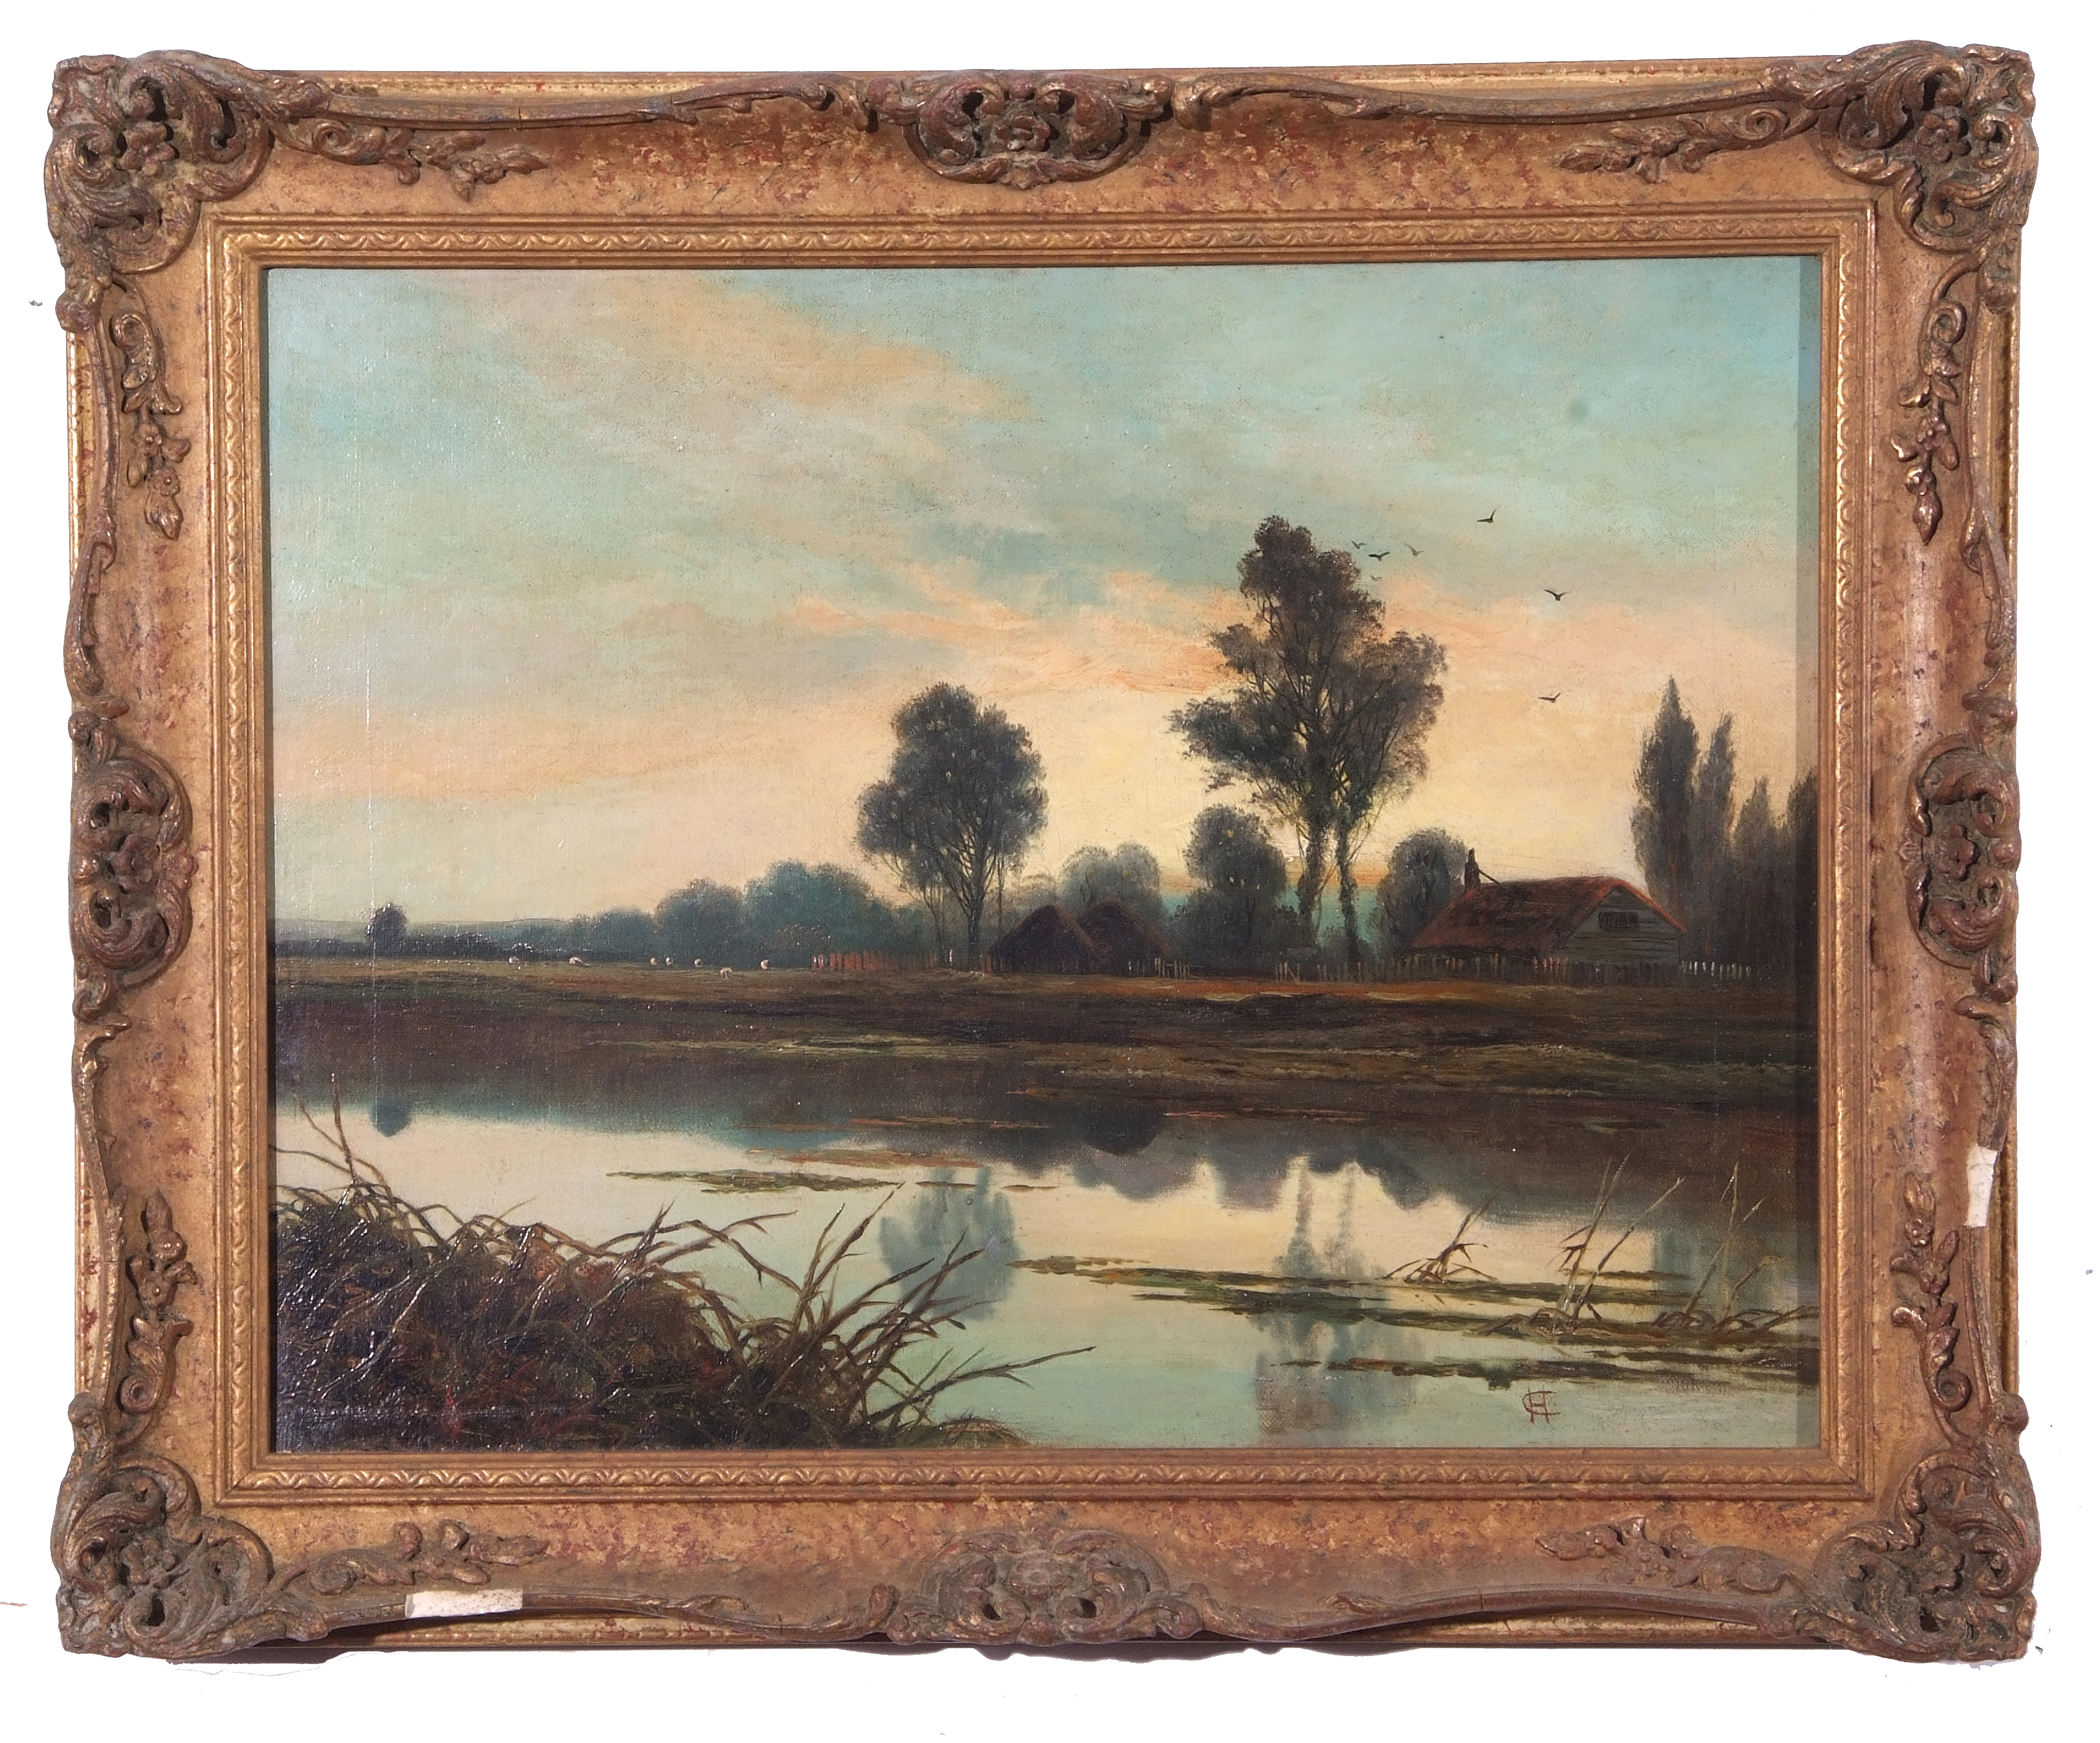 British, 20th century, River landscape with cottage in distance, oil on canvas, indistinctly